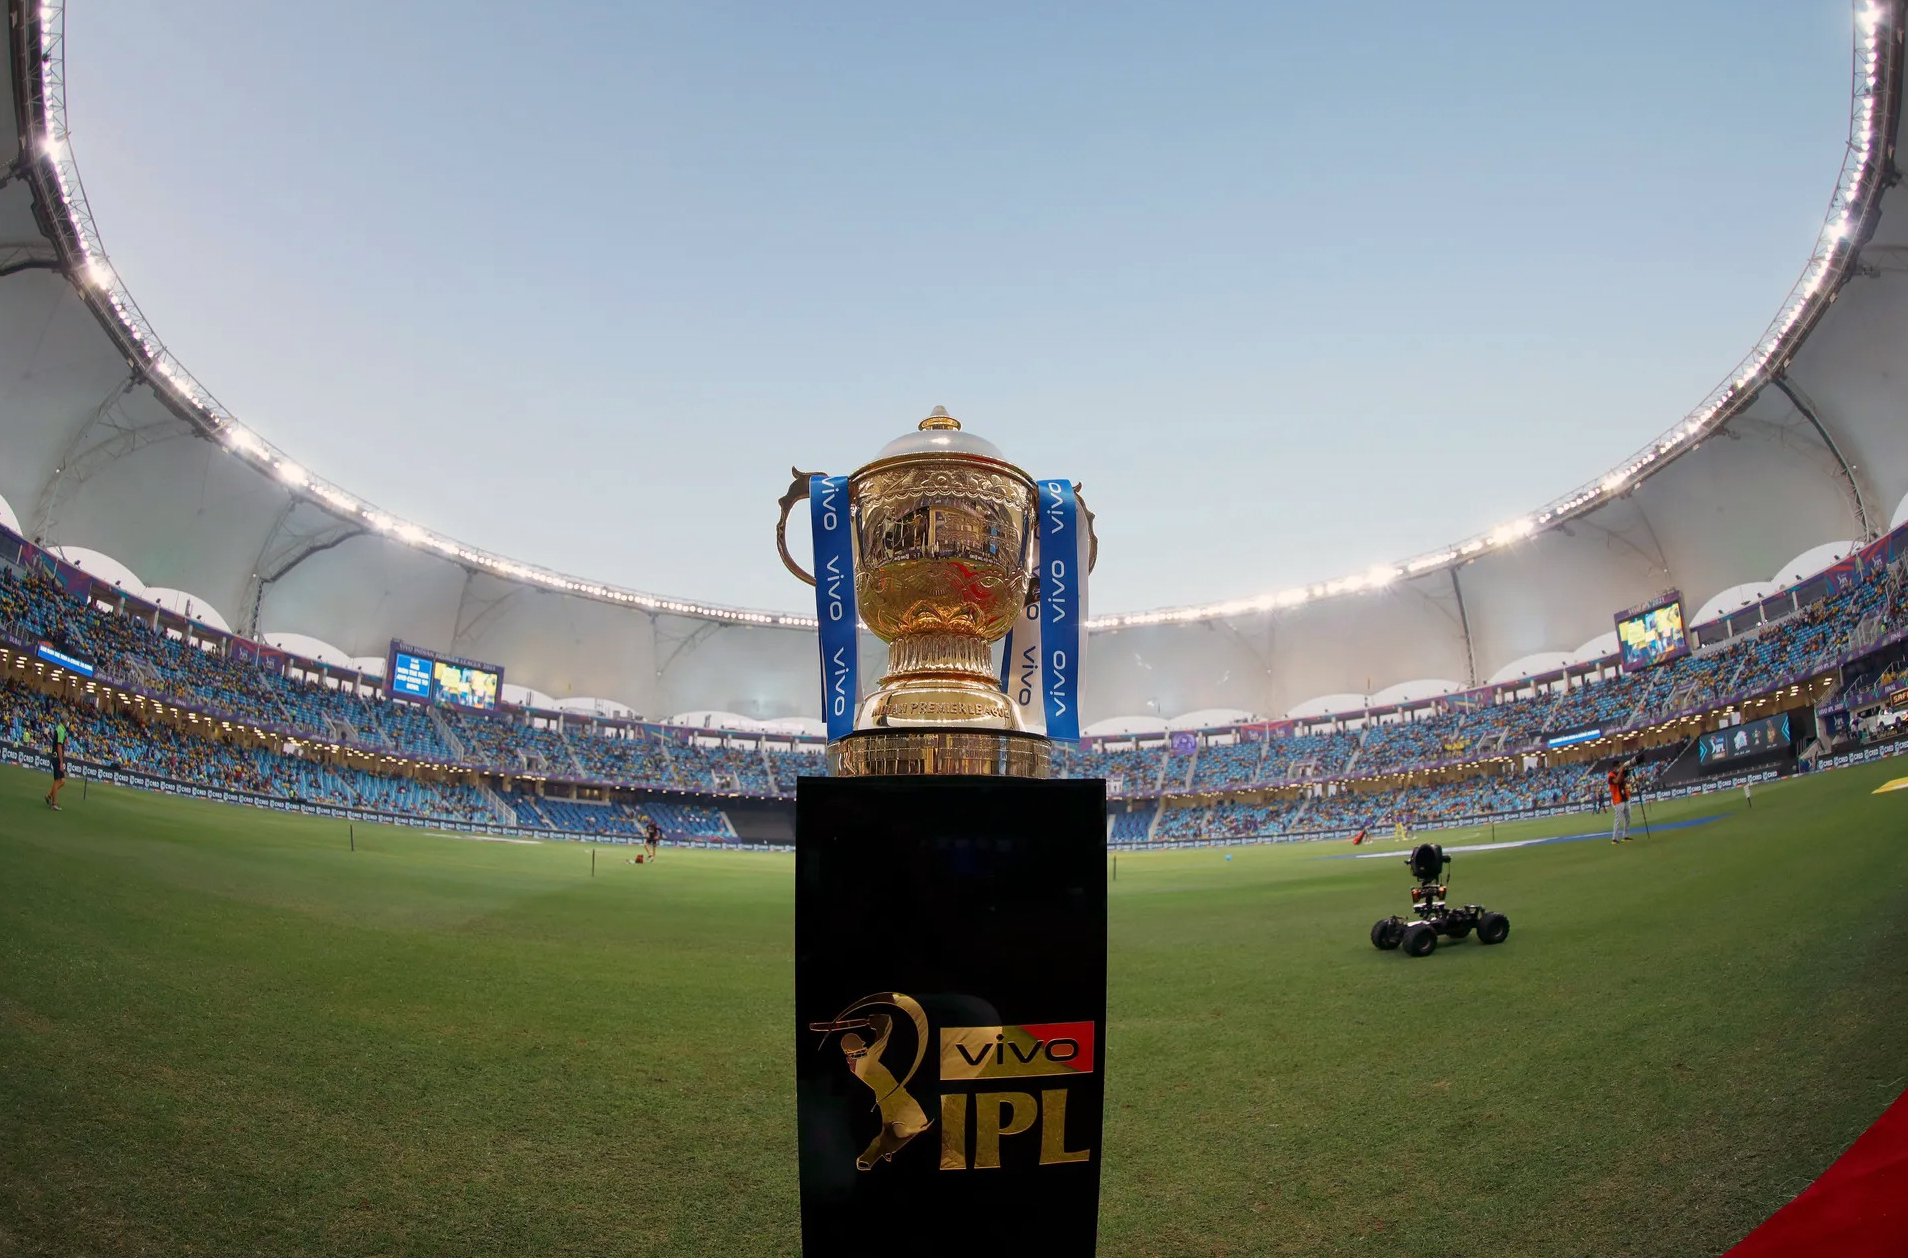 Women IPL: Viacom18 bags WIPL media rights at Rs 951 crore